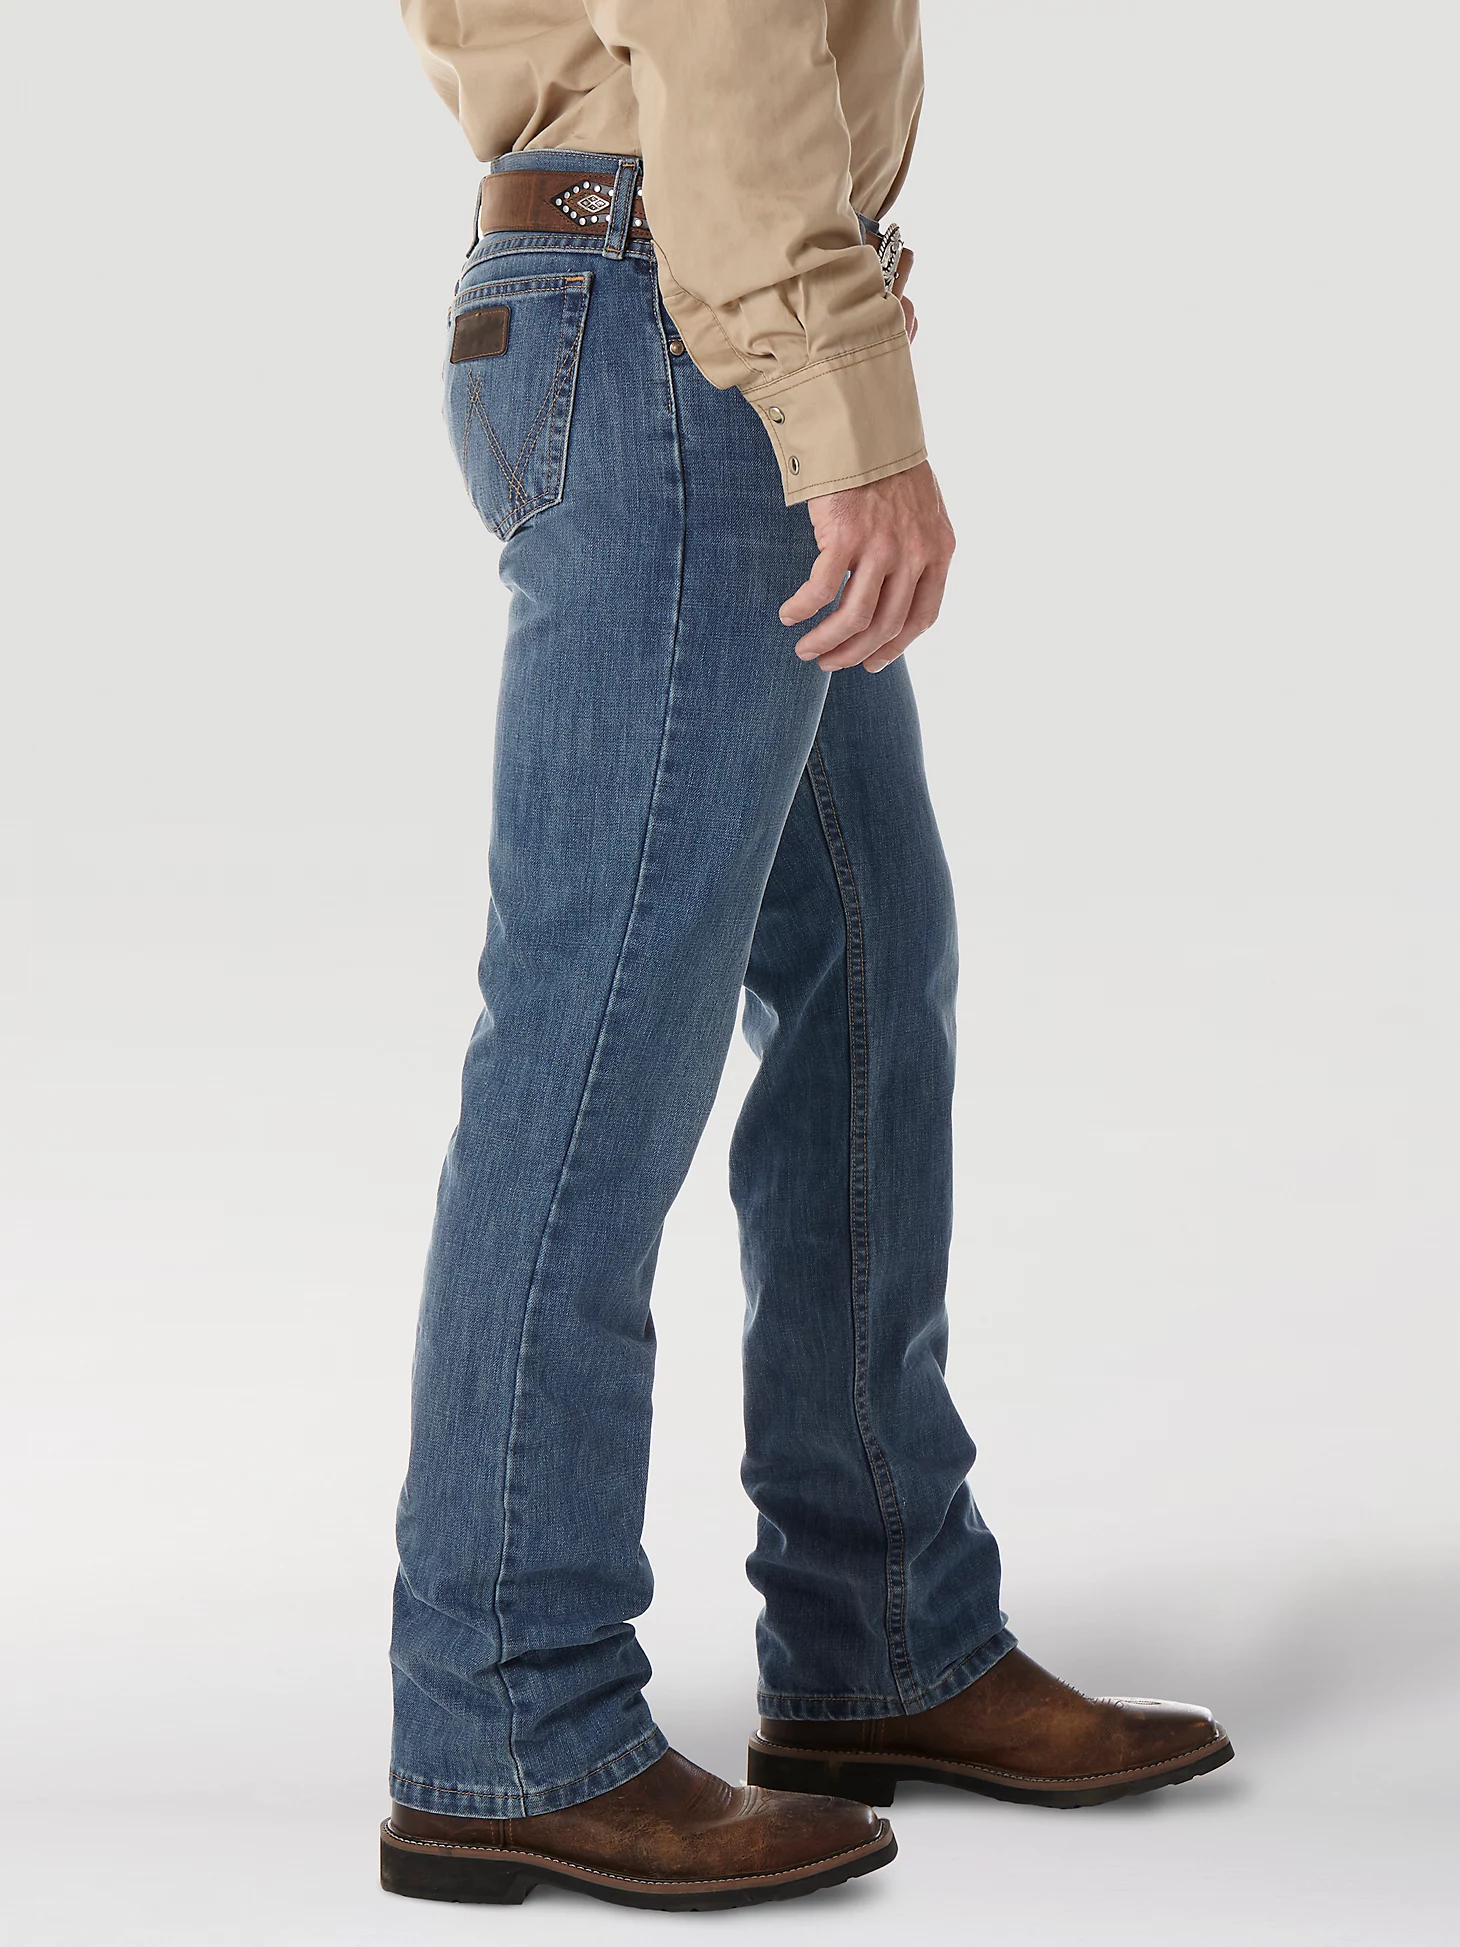 WRANGLER® 20X® 02 COMPETITION SLIM JEAN IN PAYSON : 02MWXPY